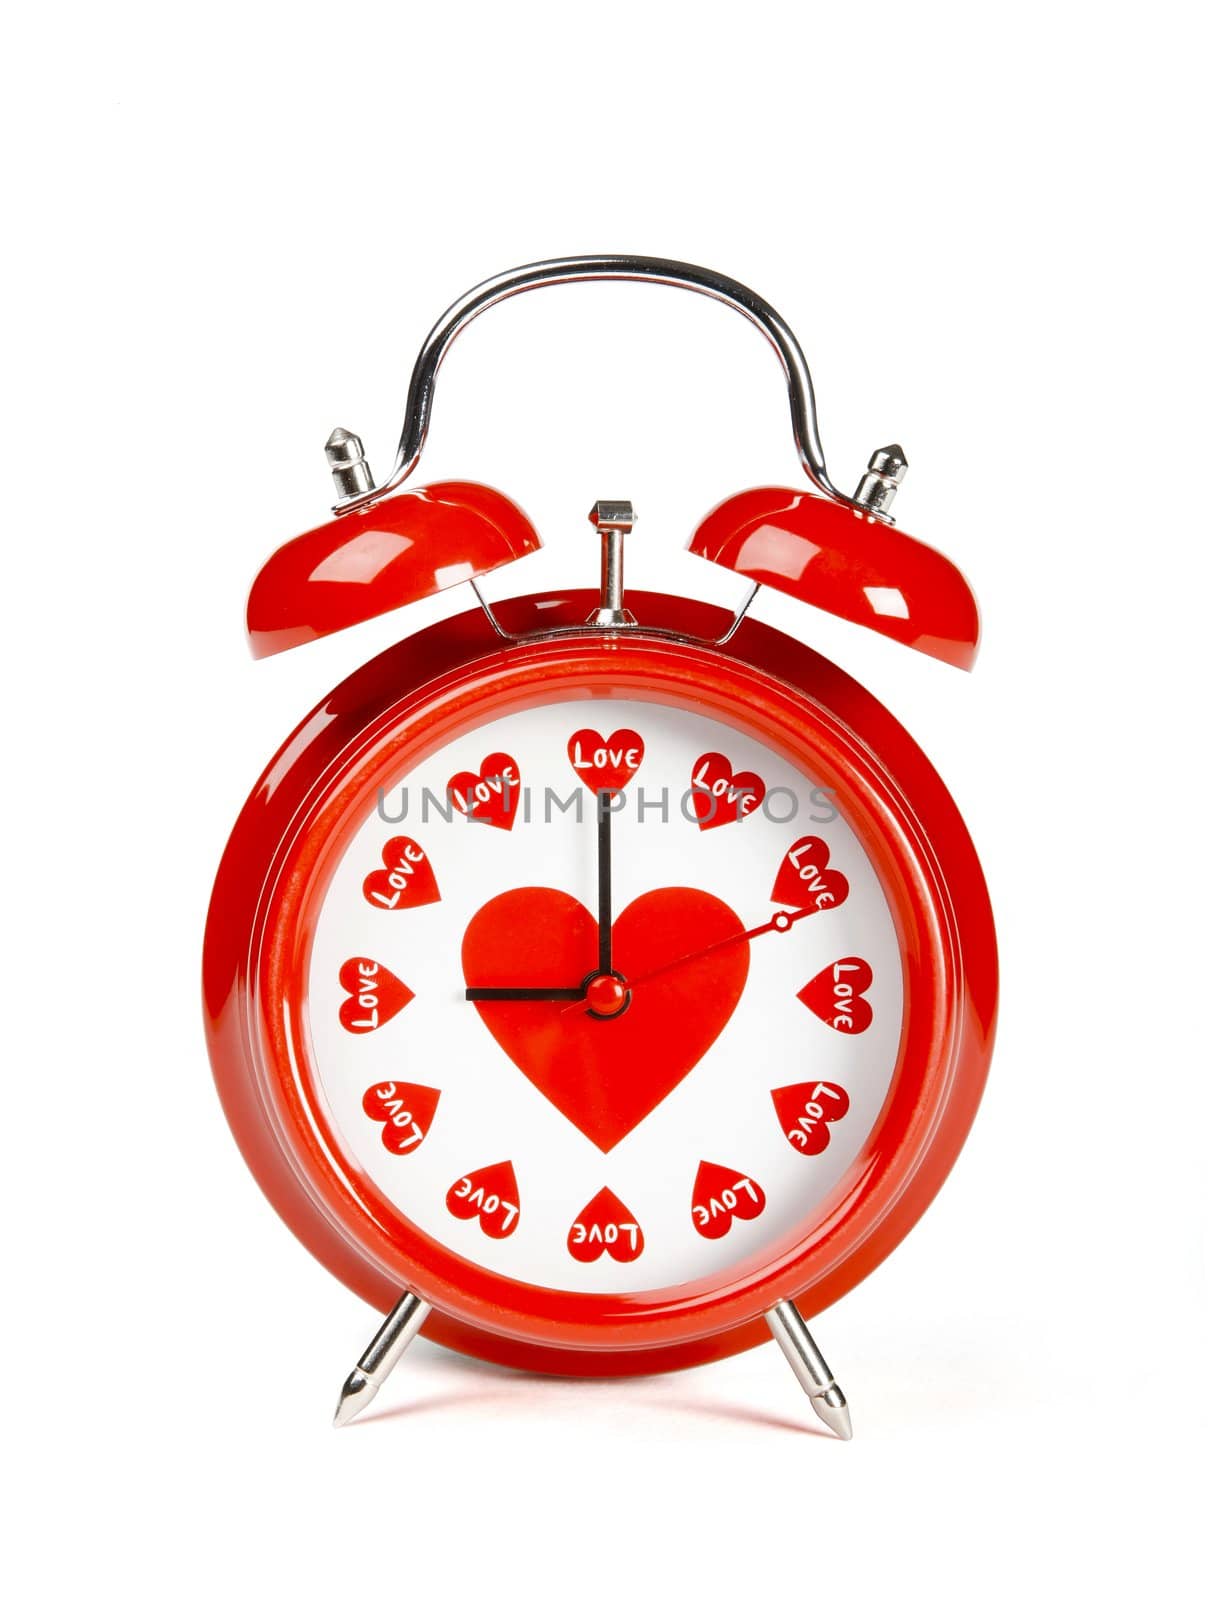 Concept image - Alarm clock with every hour set on love